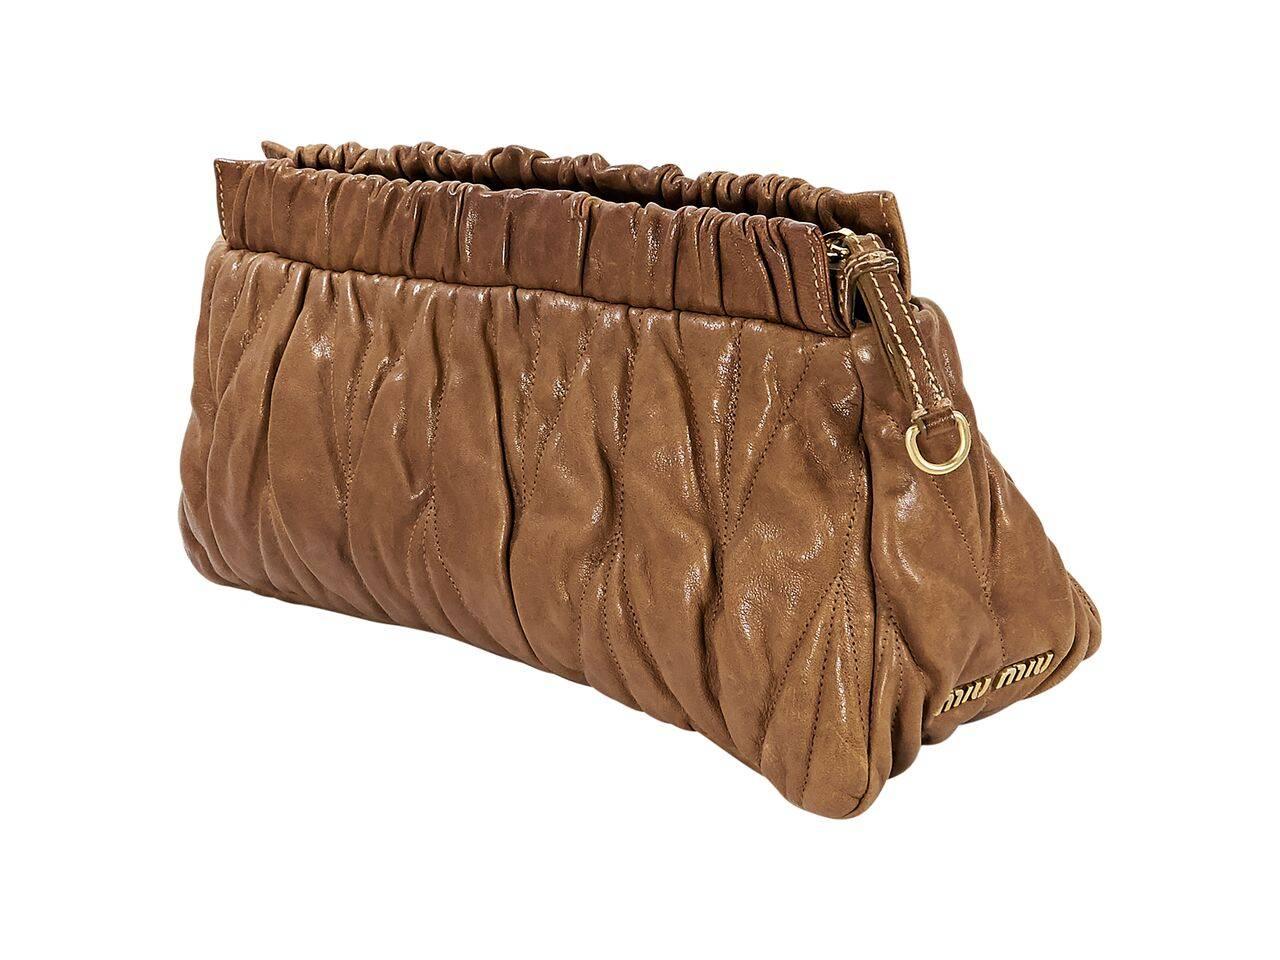 Product details:  Brown leather clutch by Miu Miu.  Top zip closure.  Lined interior with inner zip pocket.  Goldtone hardware.  12